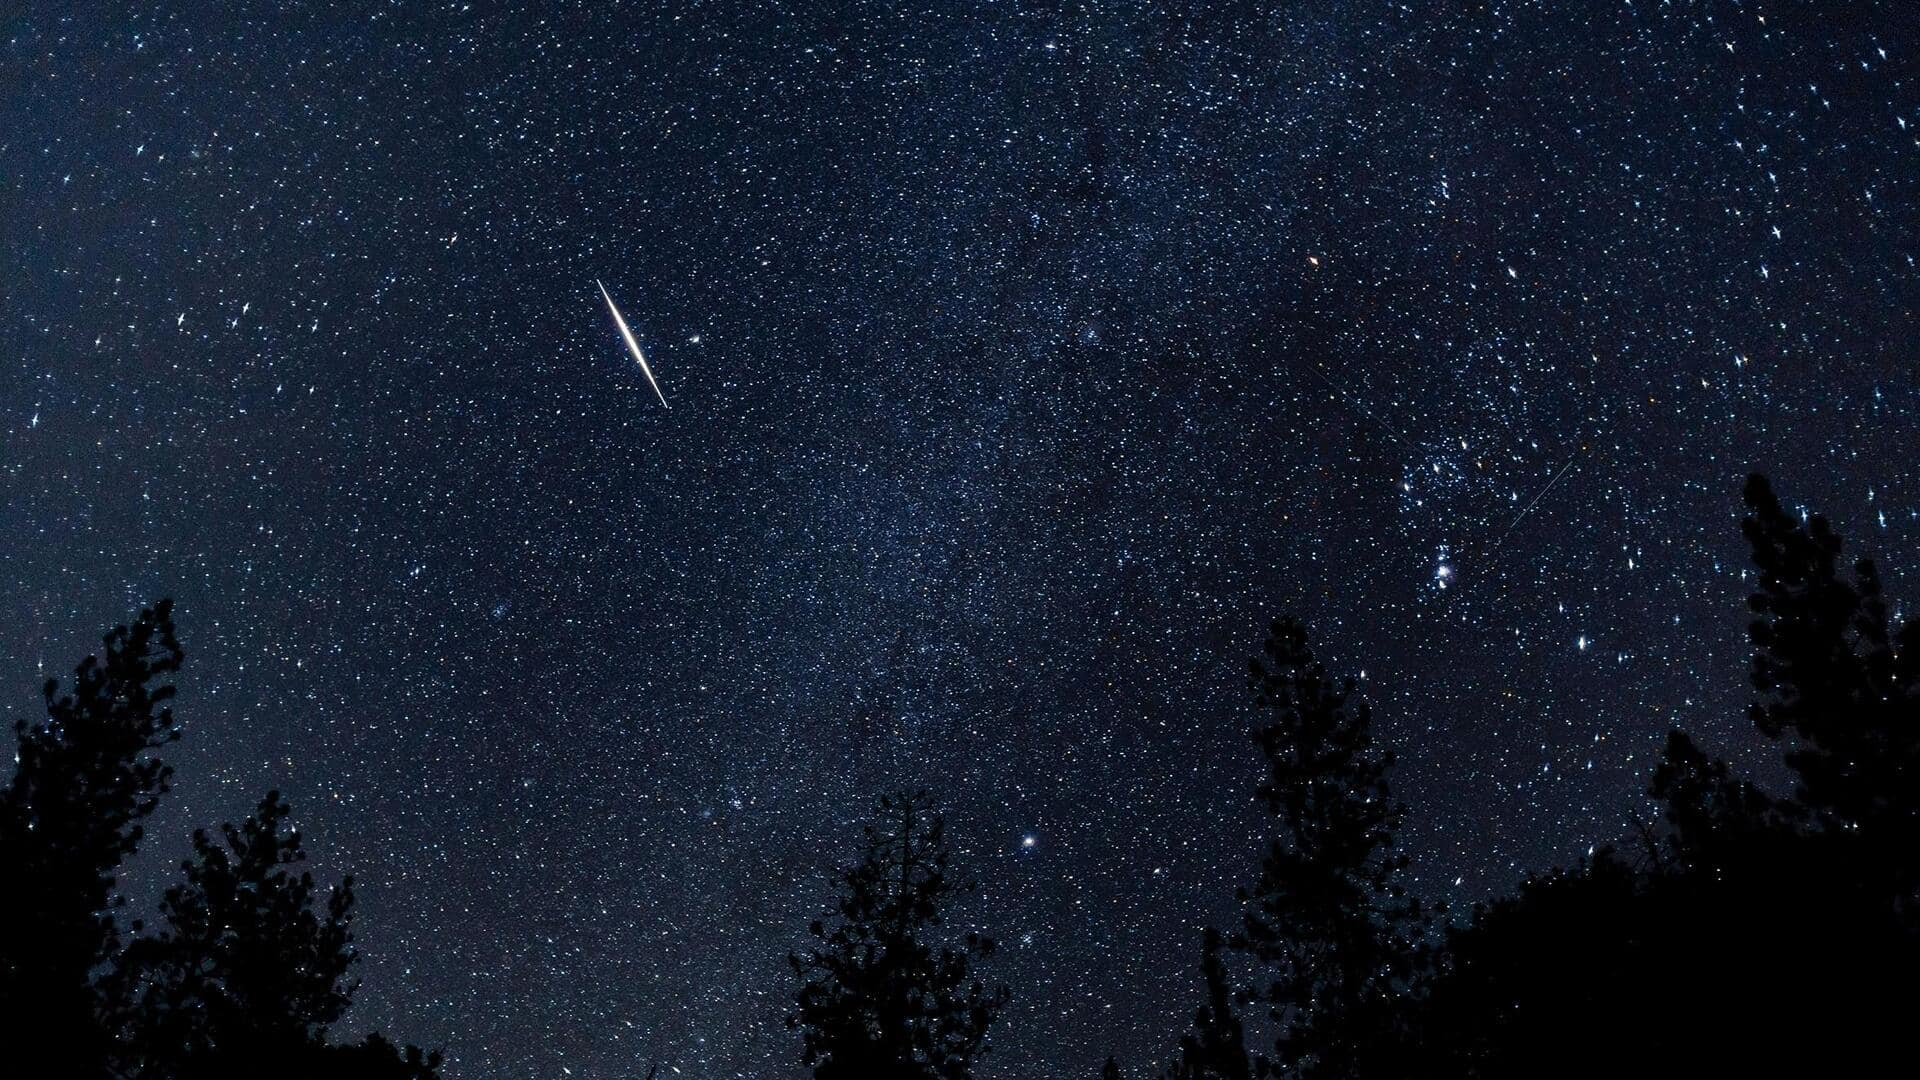 Orionid meteor shower peaks this month: How to watch